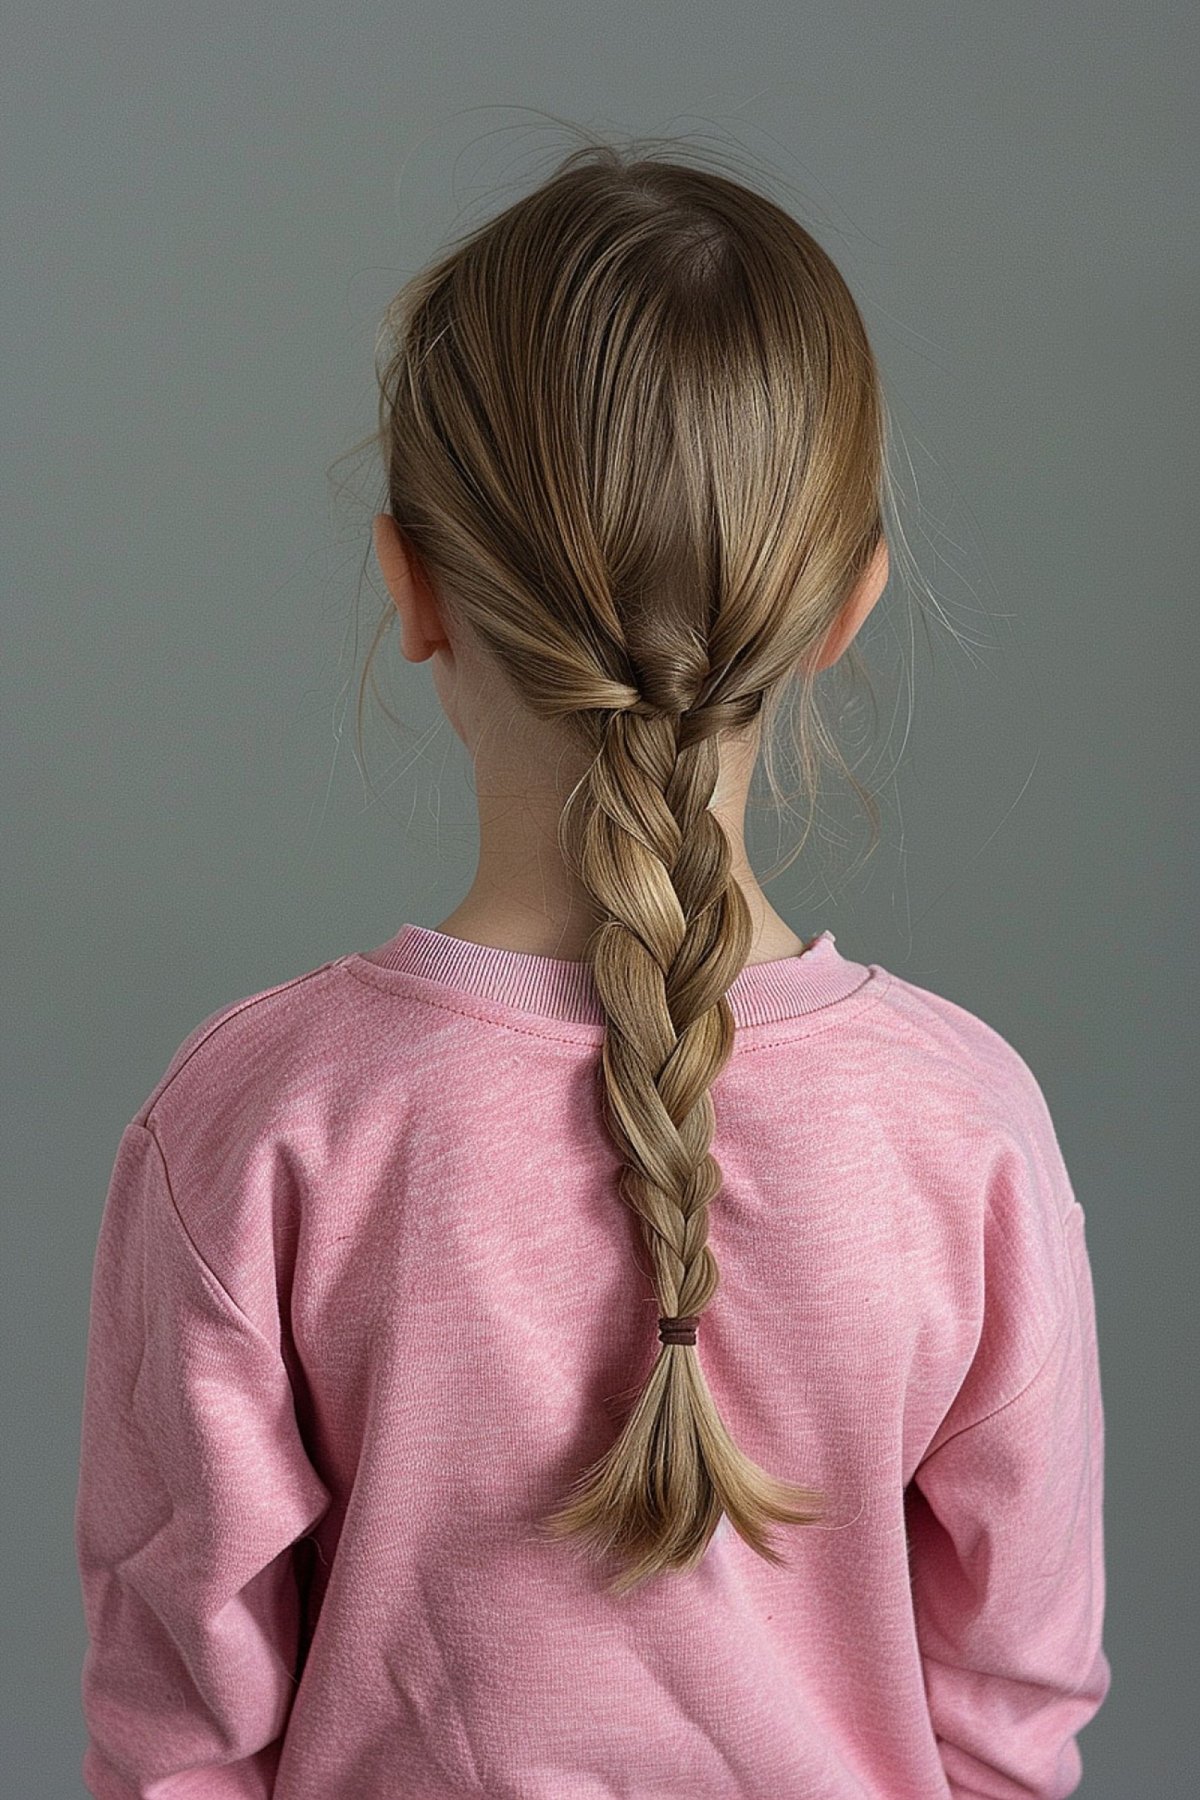 Three-strand braid hairstyle for little girls with medium to long hair